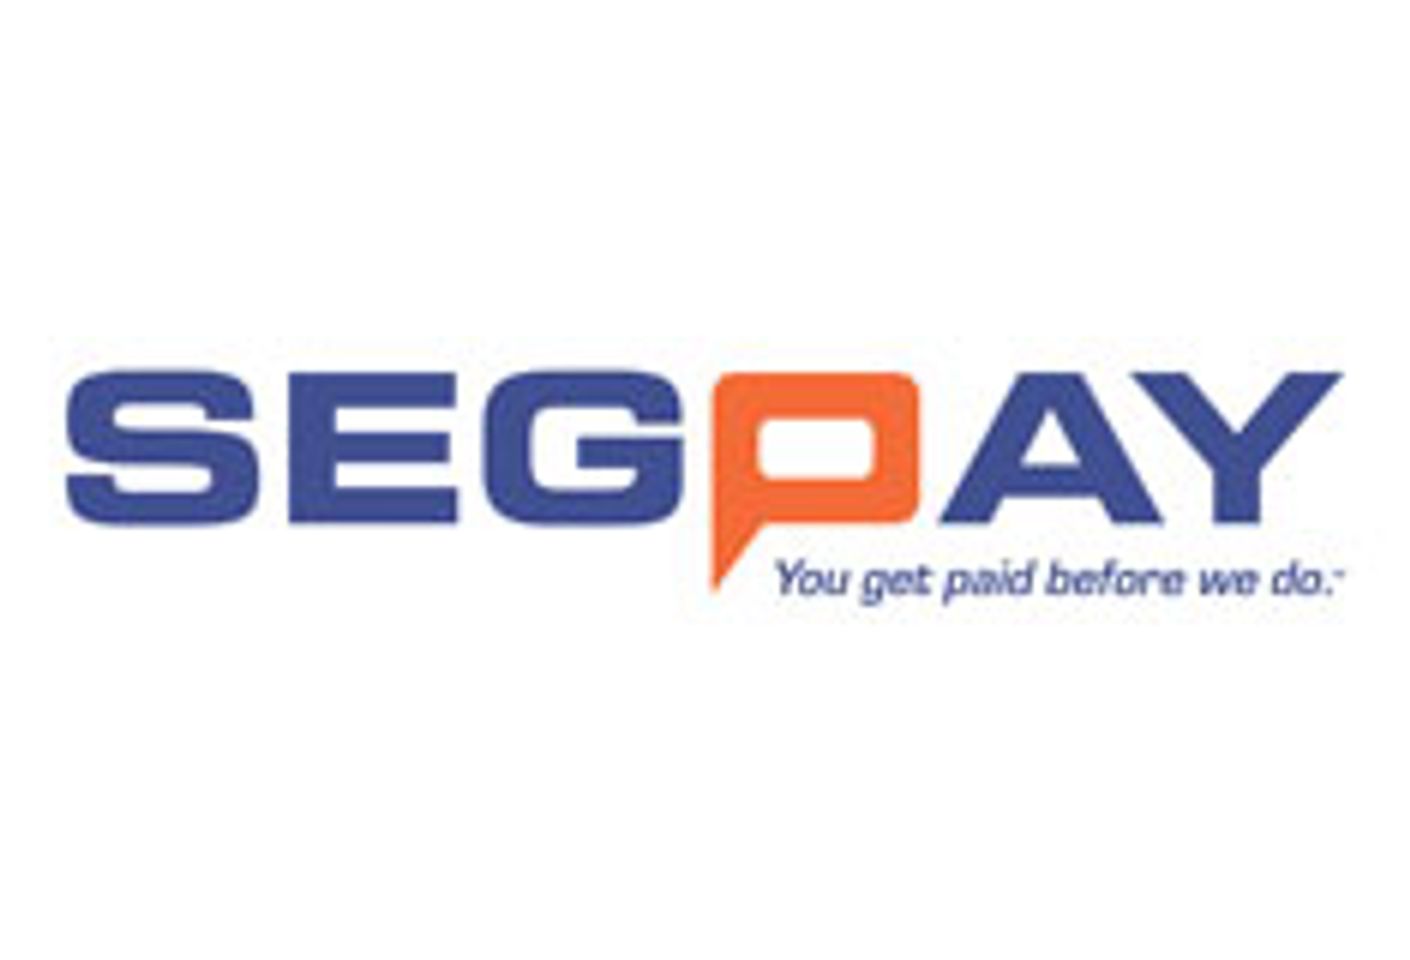 SegPay Tees Up for Big Week at The Phoenix Forum